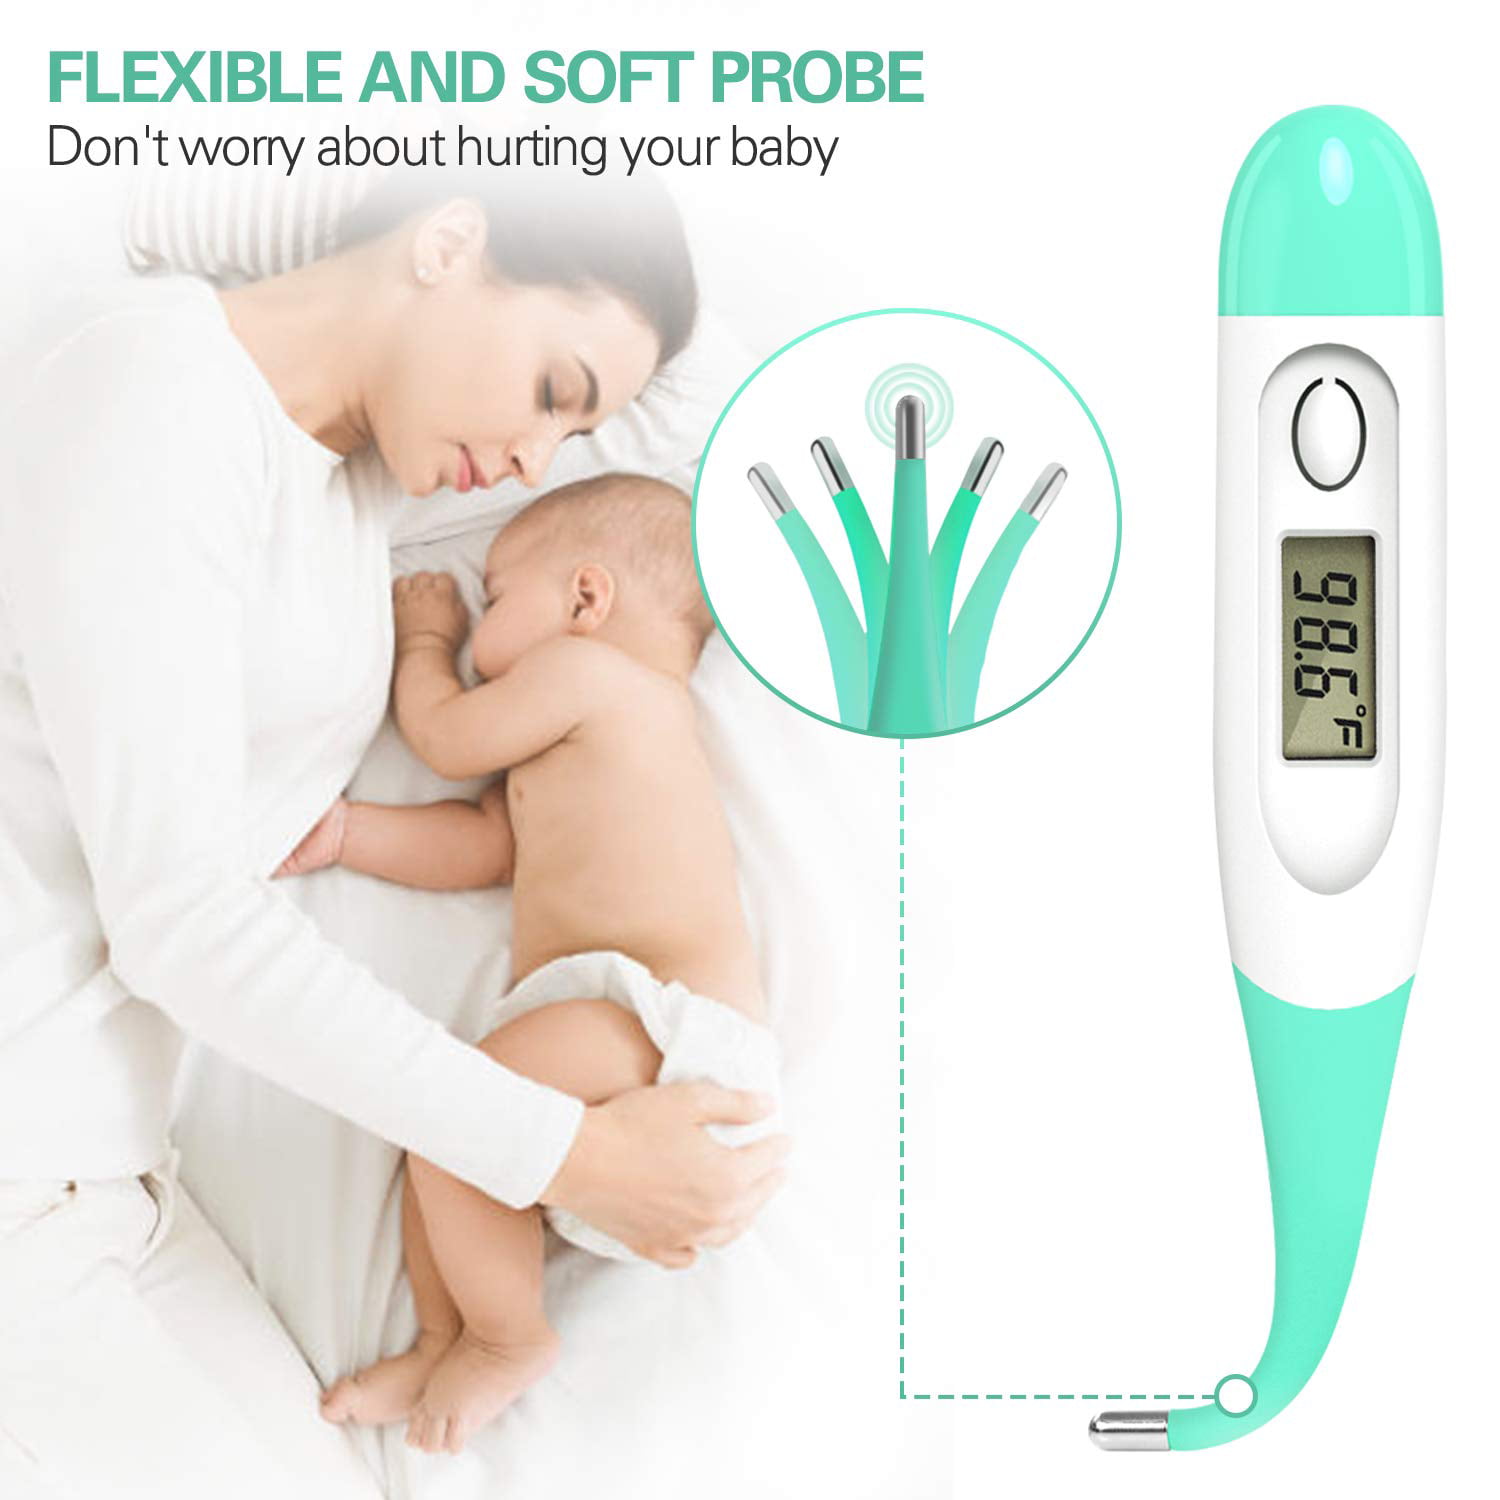 Digital clinical thermometer with fever alarm ▻ waterproof✓ fast ✓ precise ✓